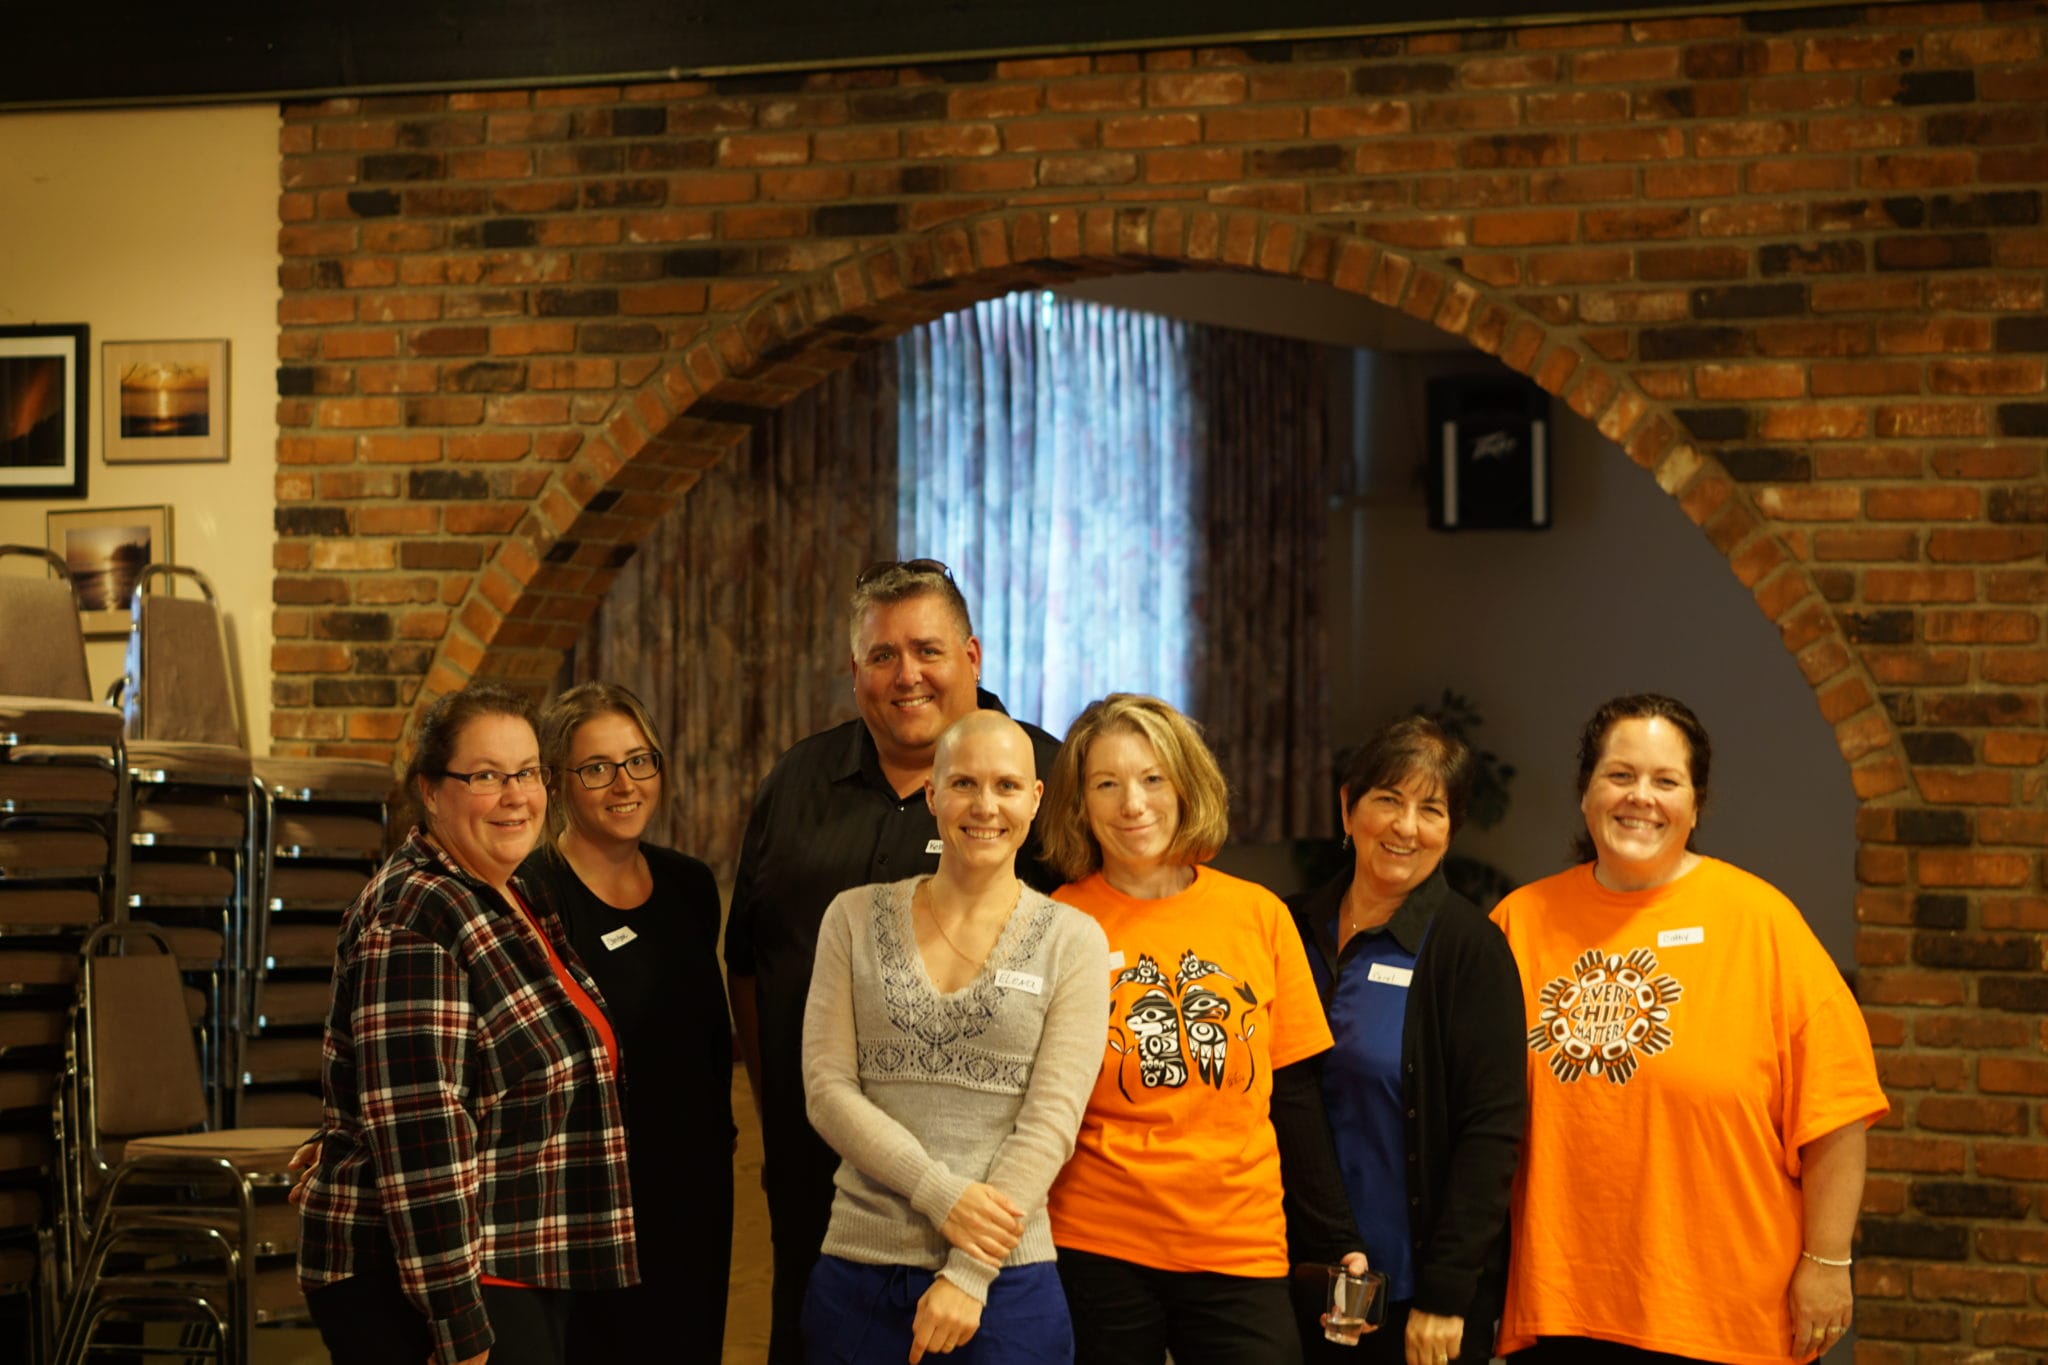 Group of seven adults smiling in a room with a brick arch, three in orange shirts and two wearing name tags.